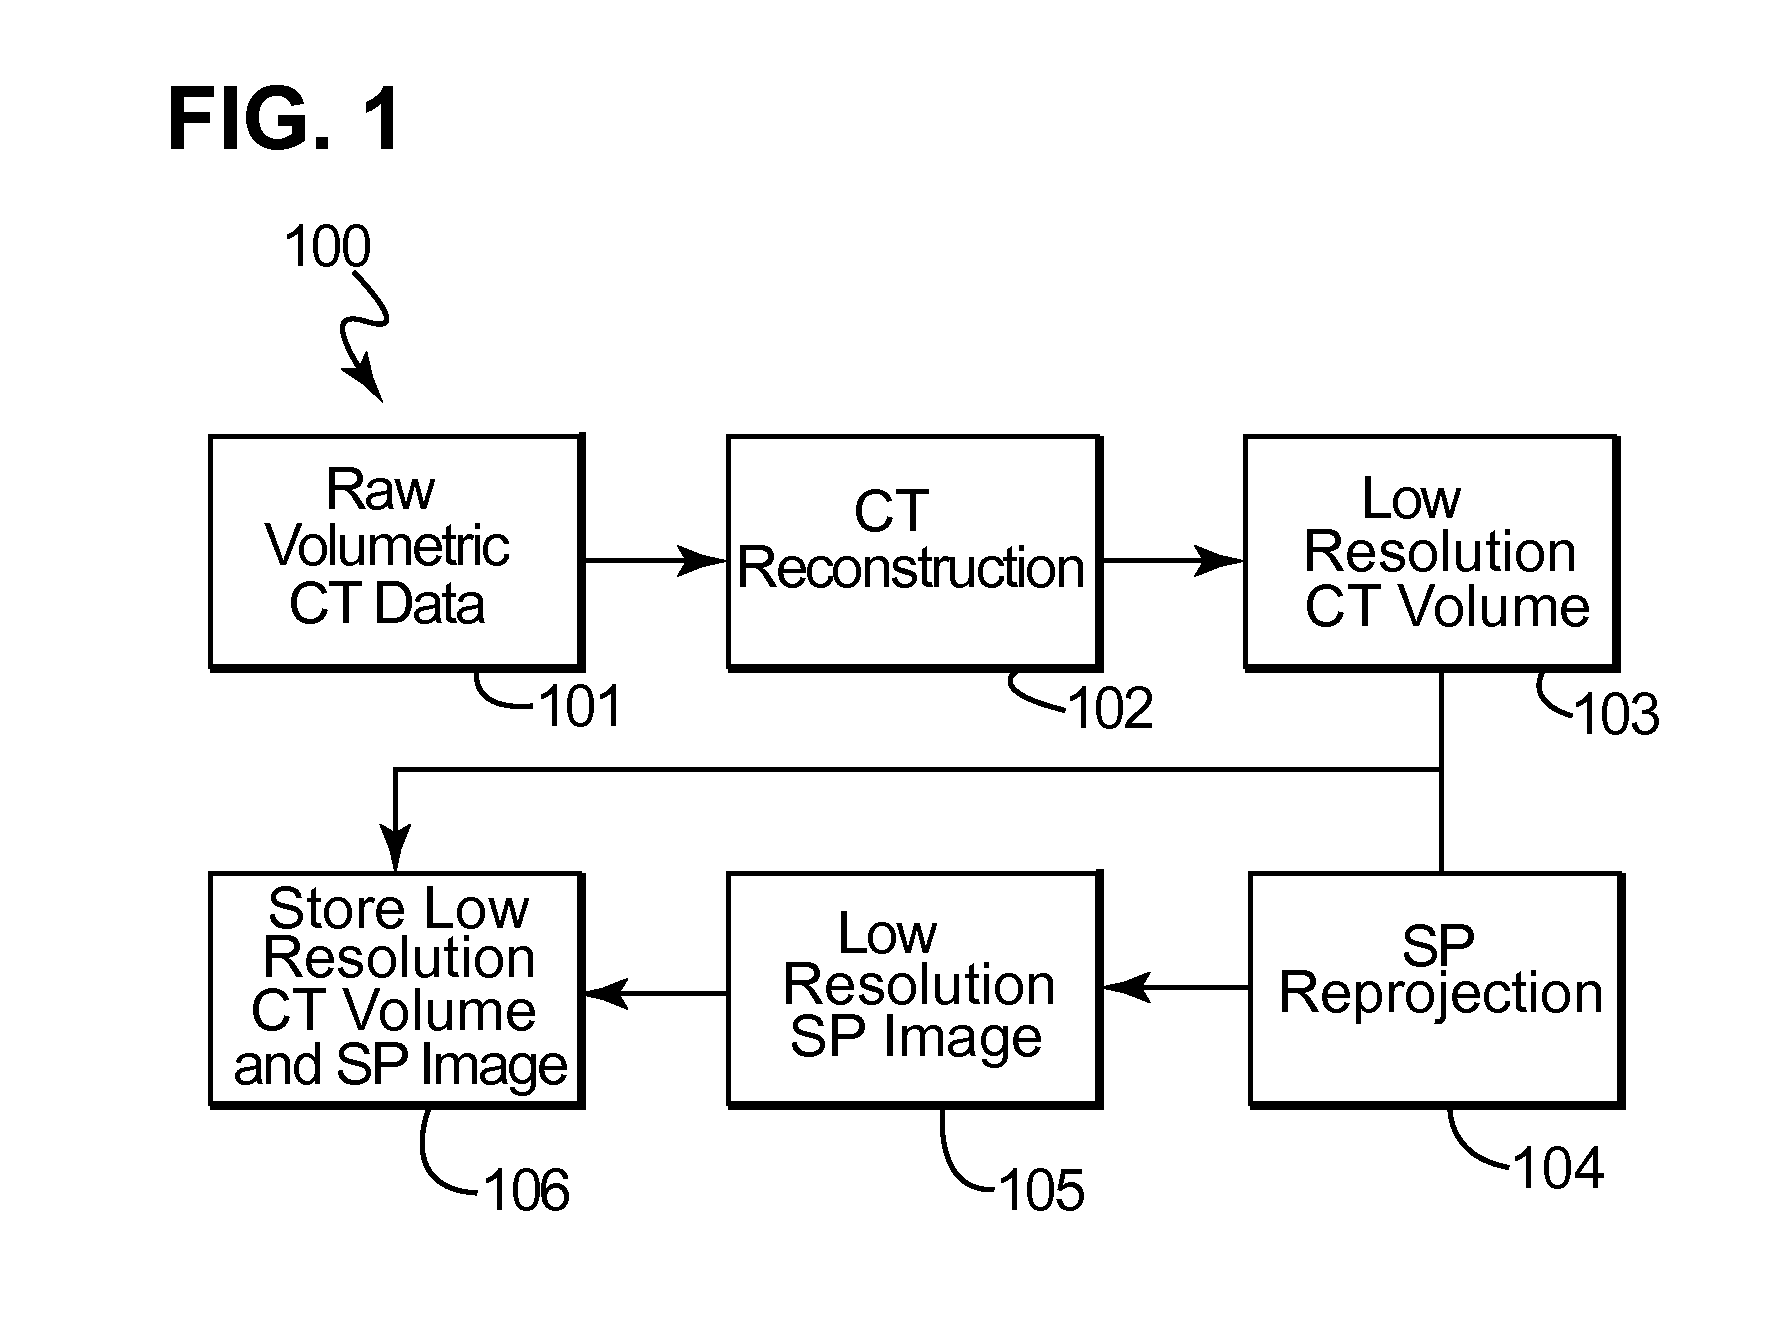 Methods for explosive detection with multiresolution computed tomography data